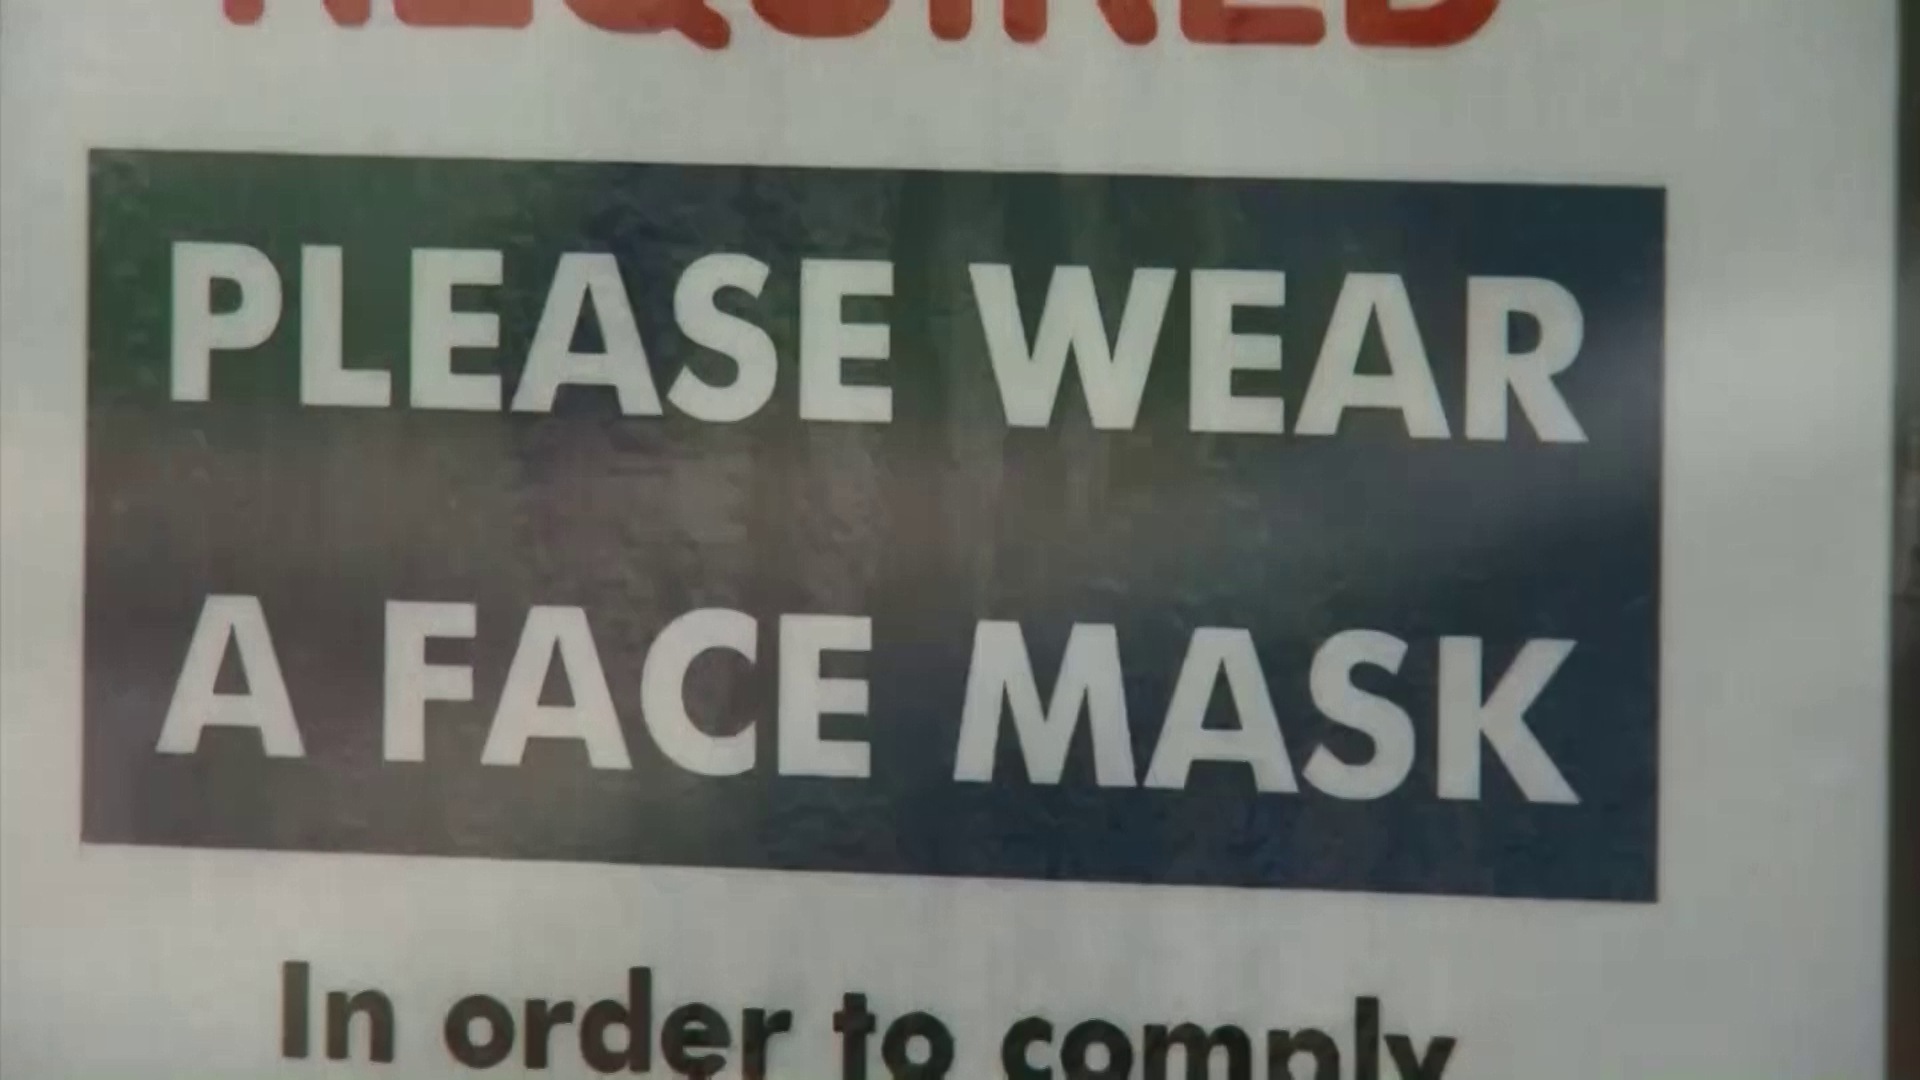 Starting Wednesday, masks will no longer be required in Texas. That leaves the CDC recommendation in the hands of private businesses. Here's what you need to know.